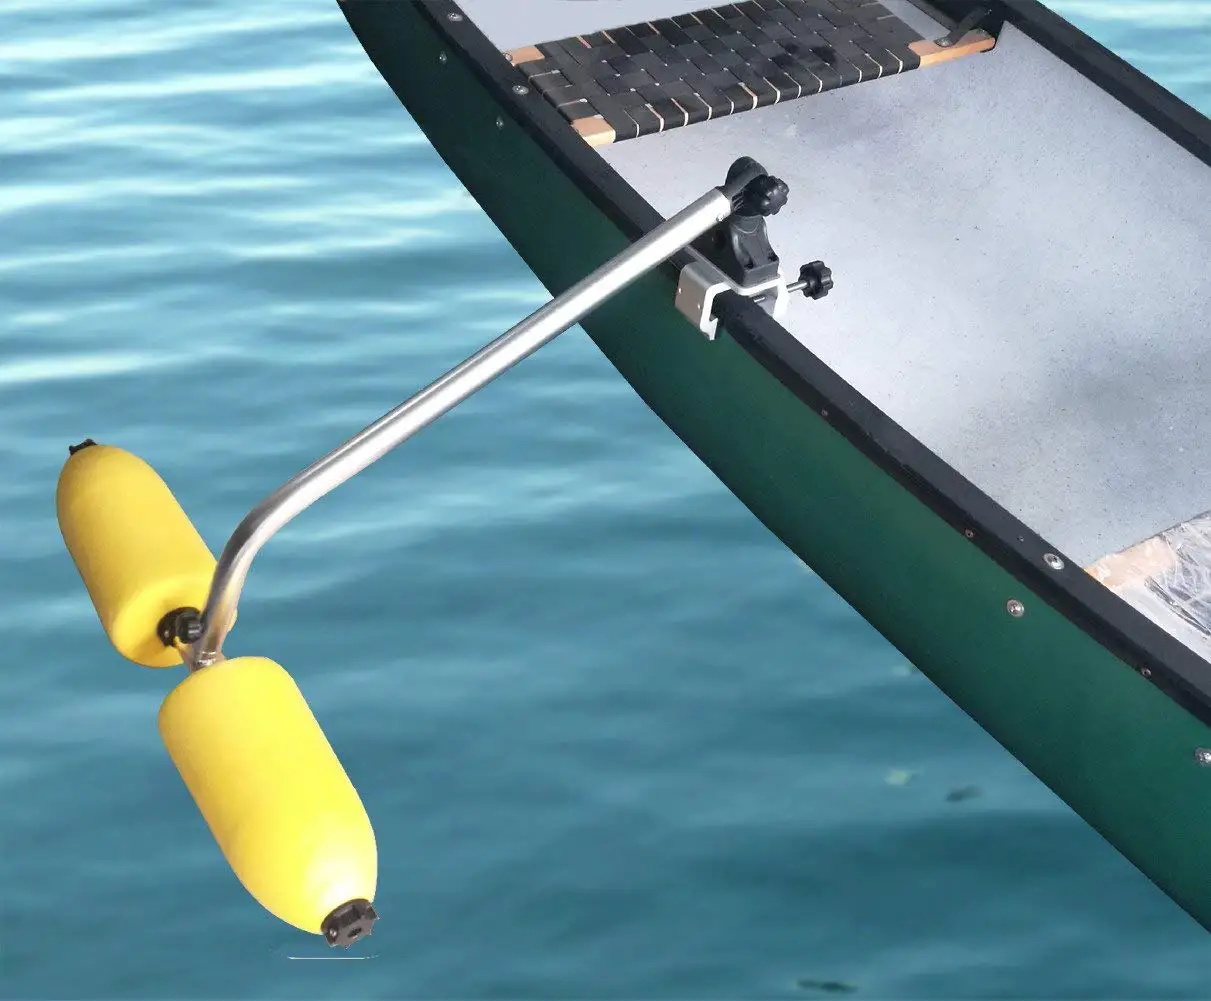 Buy Brocraft Canoe Outriggers/Canoe Stabilizers System in 